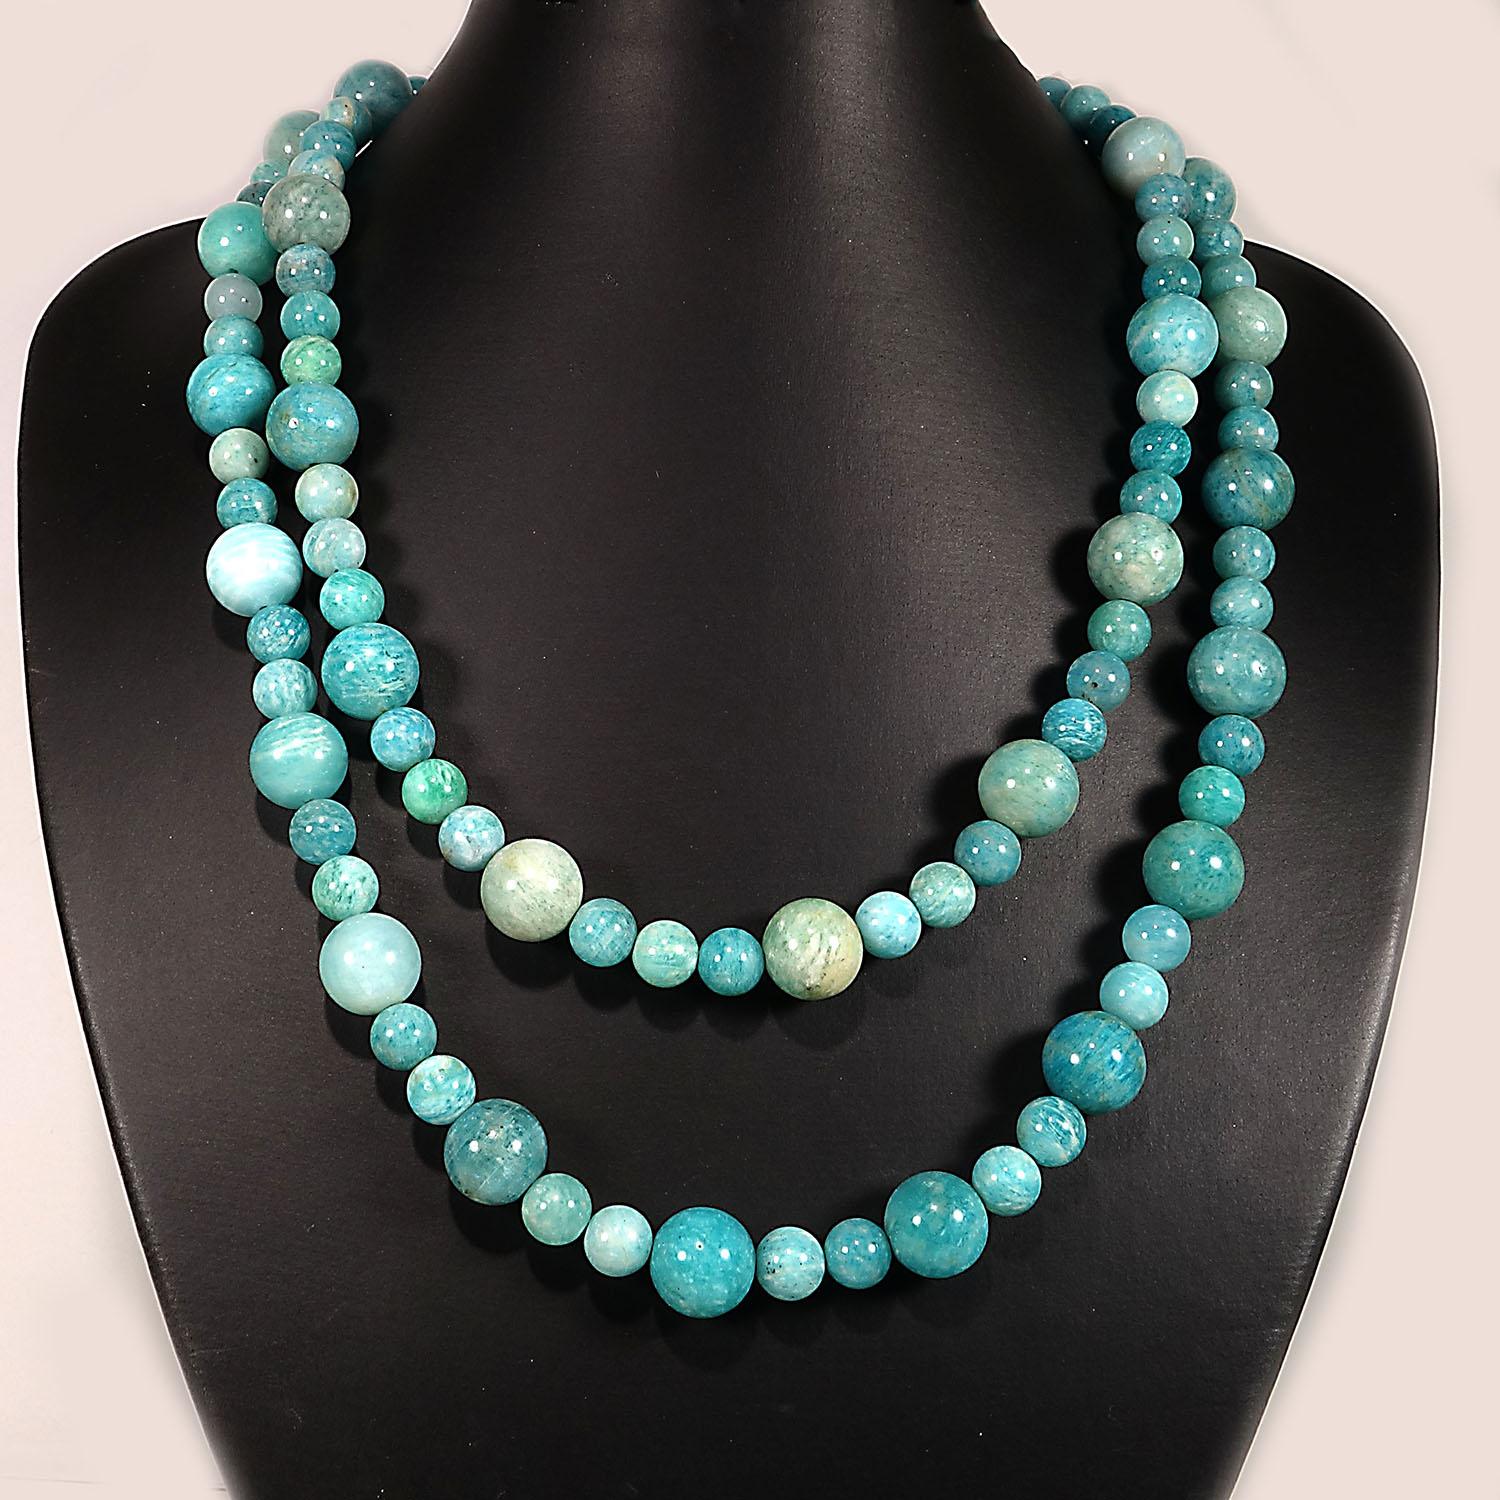 Women's or Men's Gemjunky Double Strand Necklace of Polished Opaque Amazonite